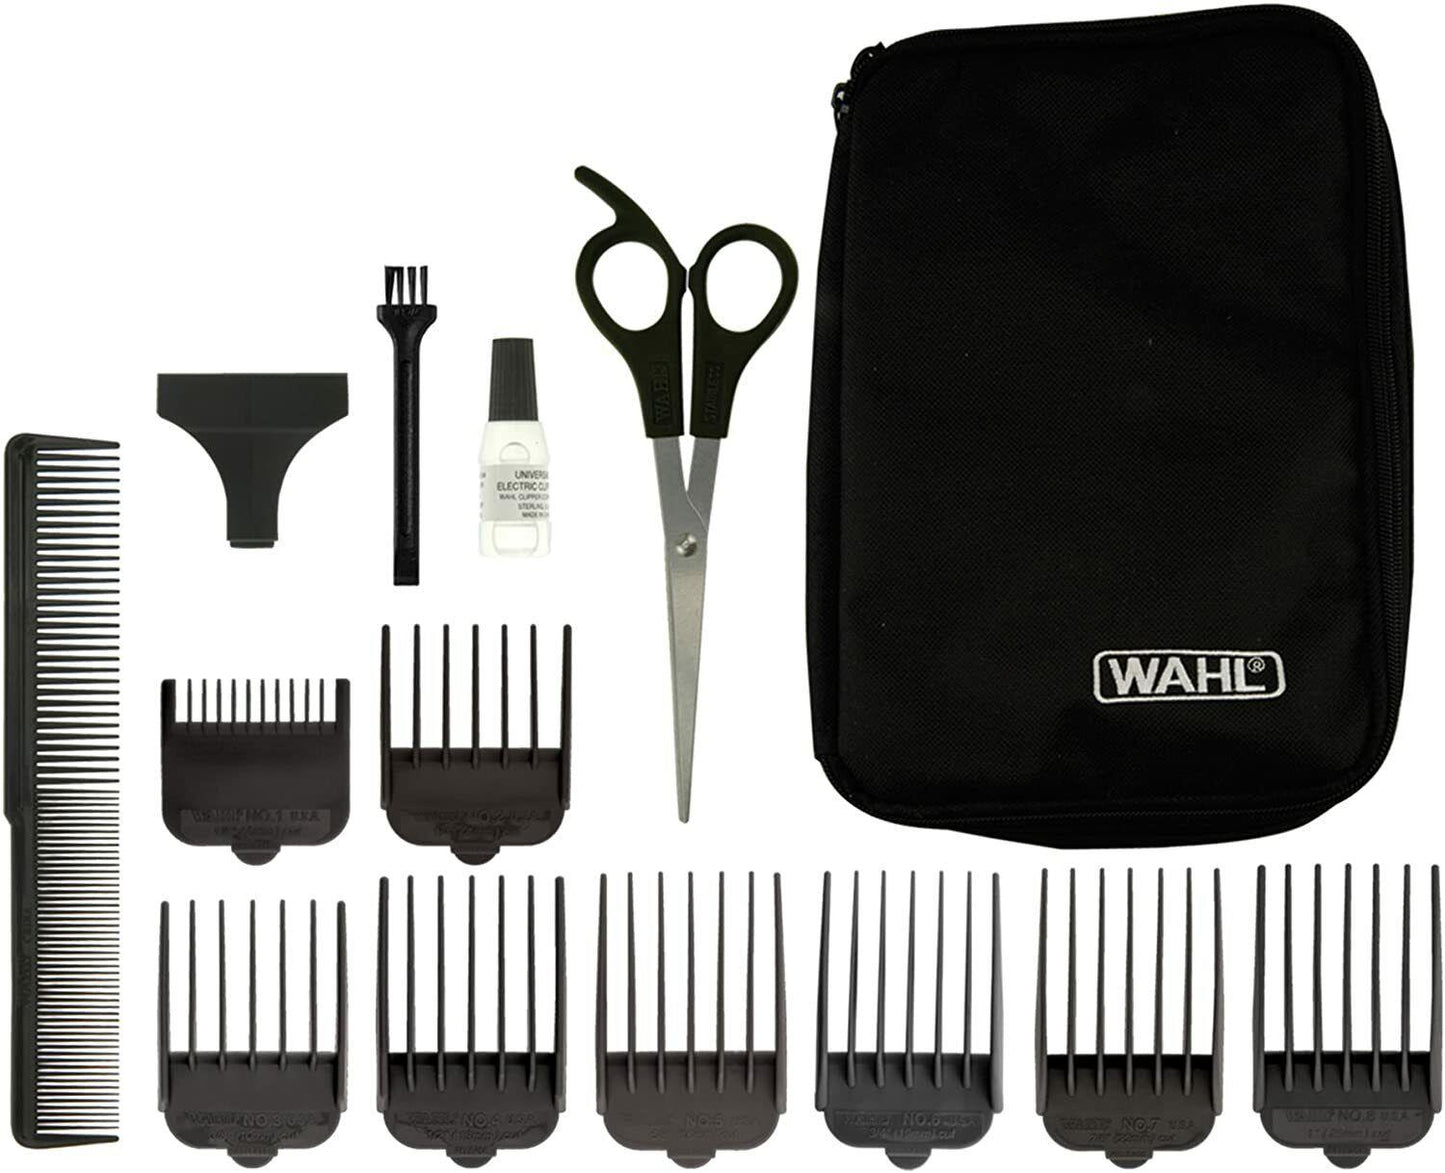 Wahl Groomease Sure Cut Mains Clipper (Carton of 10)